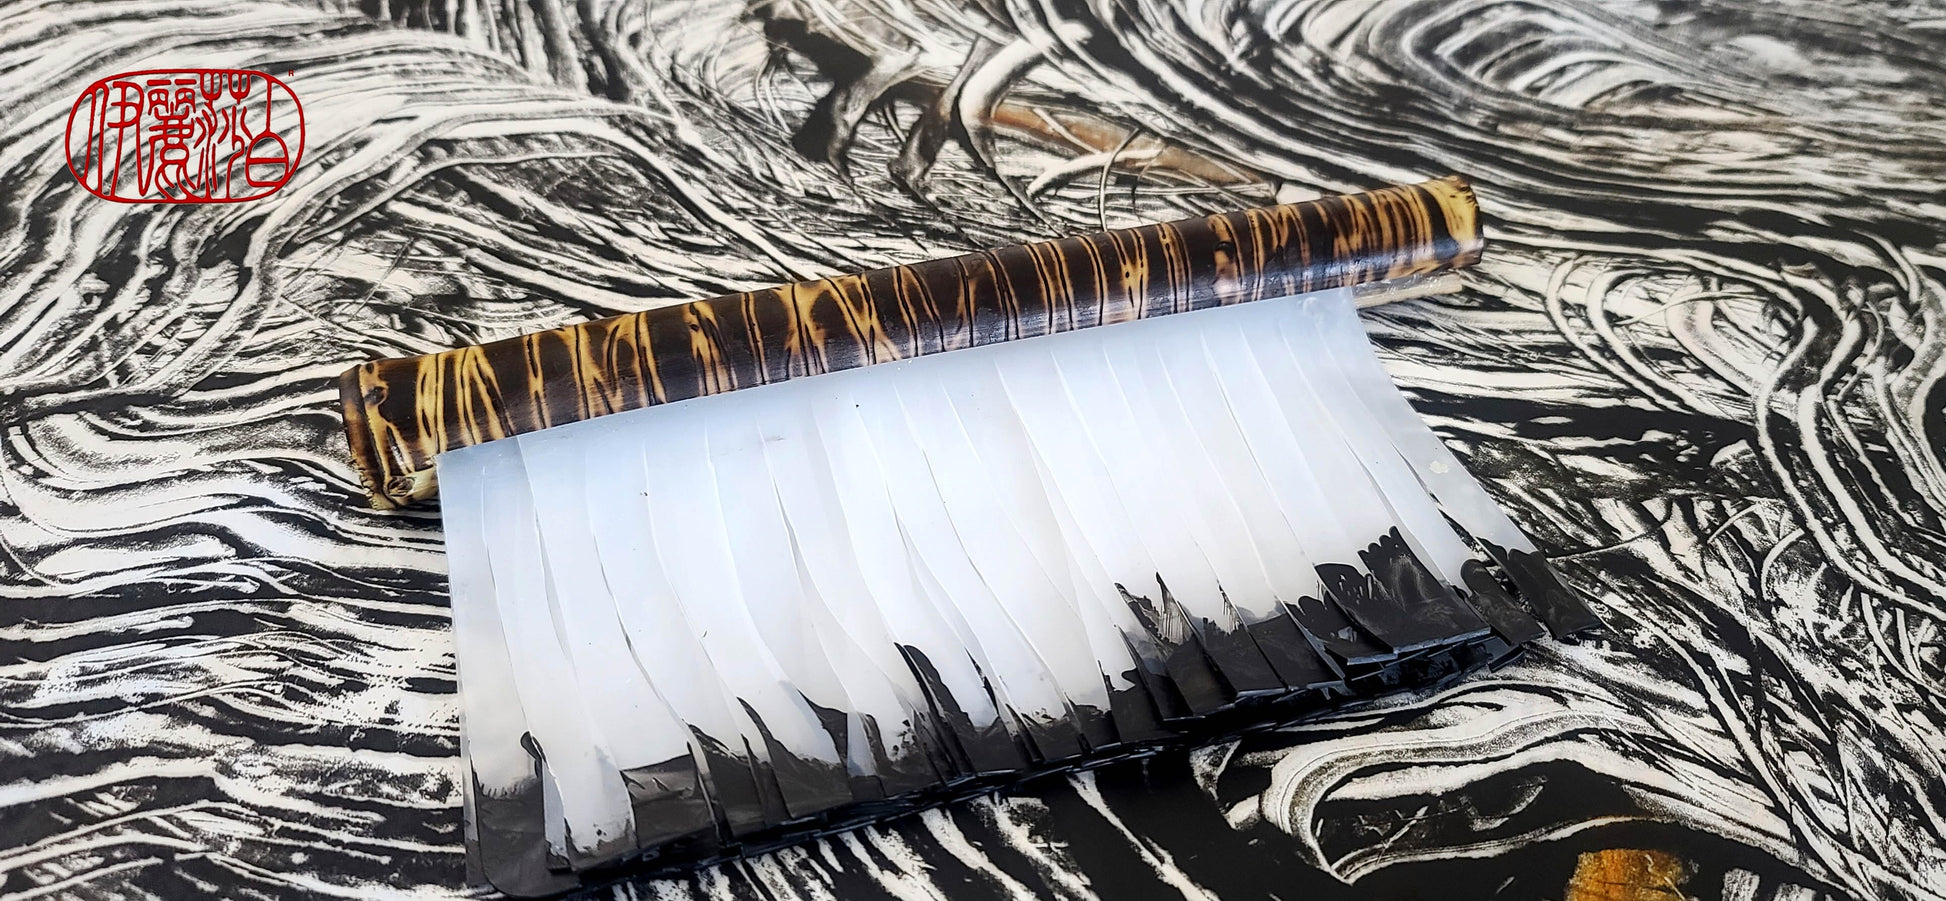 Wide Silicone Paint Brushes With Bamboo Handles (size 6" - 12") SB 131 Encaustic Tool Elizabeth Schowachert Art